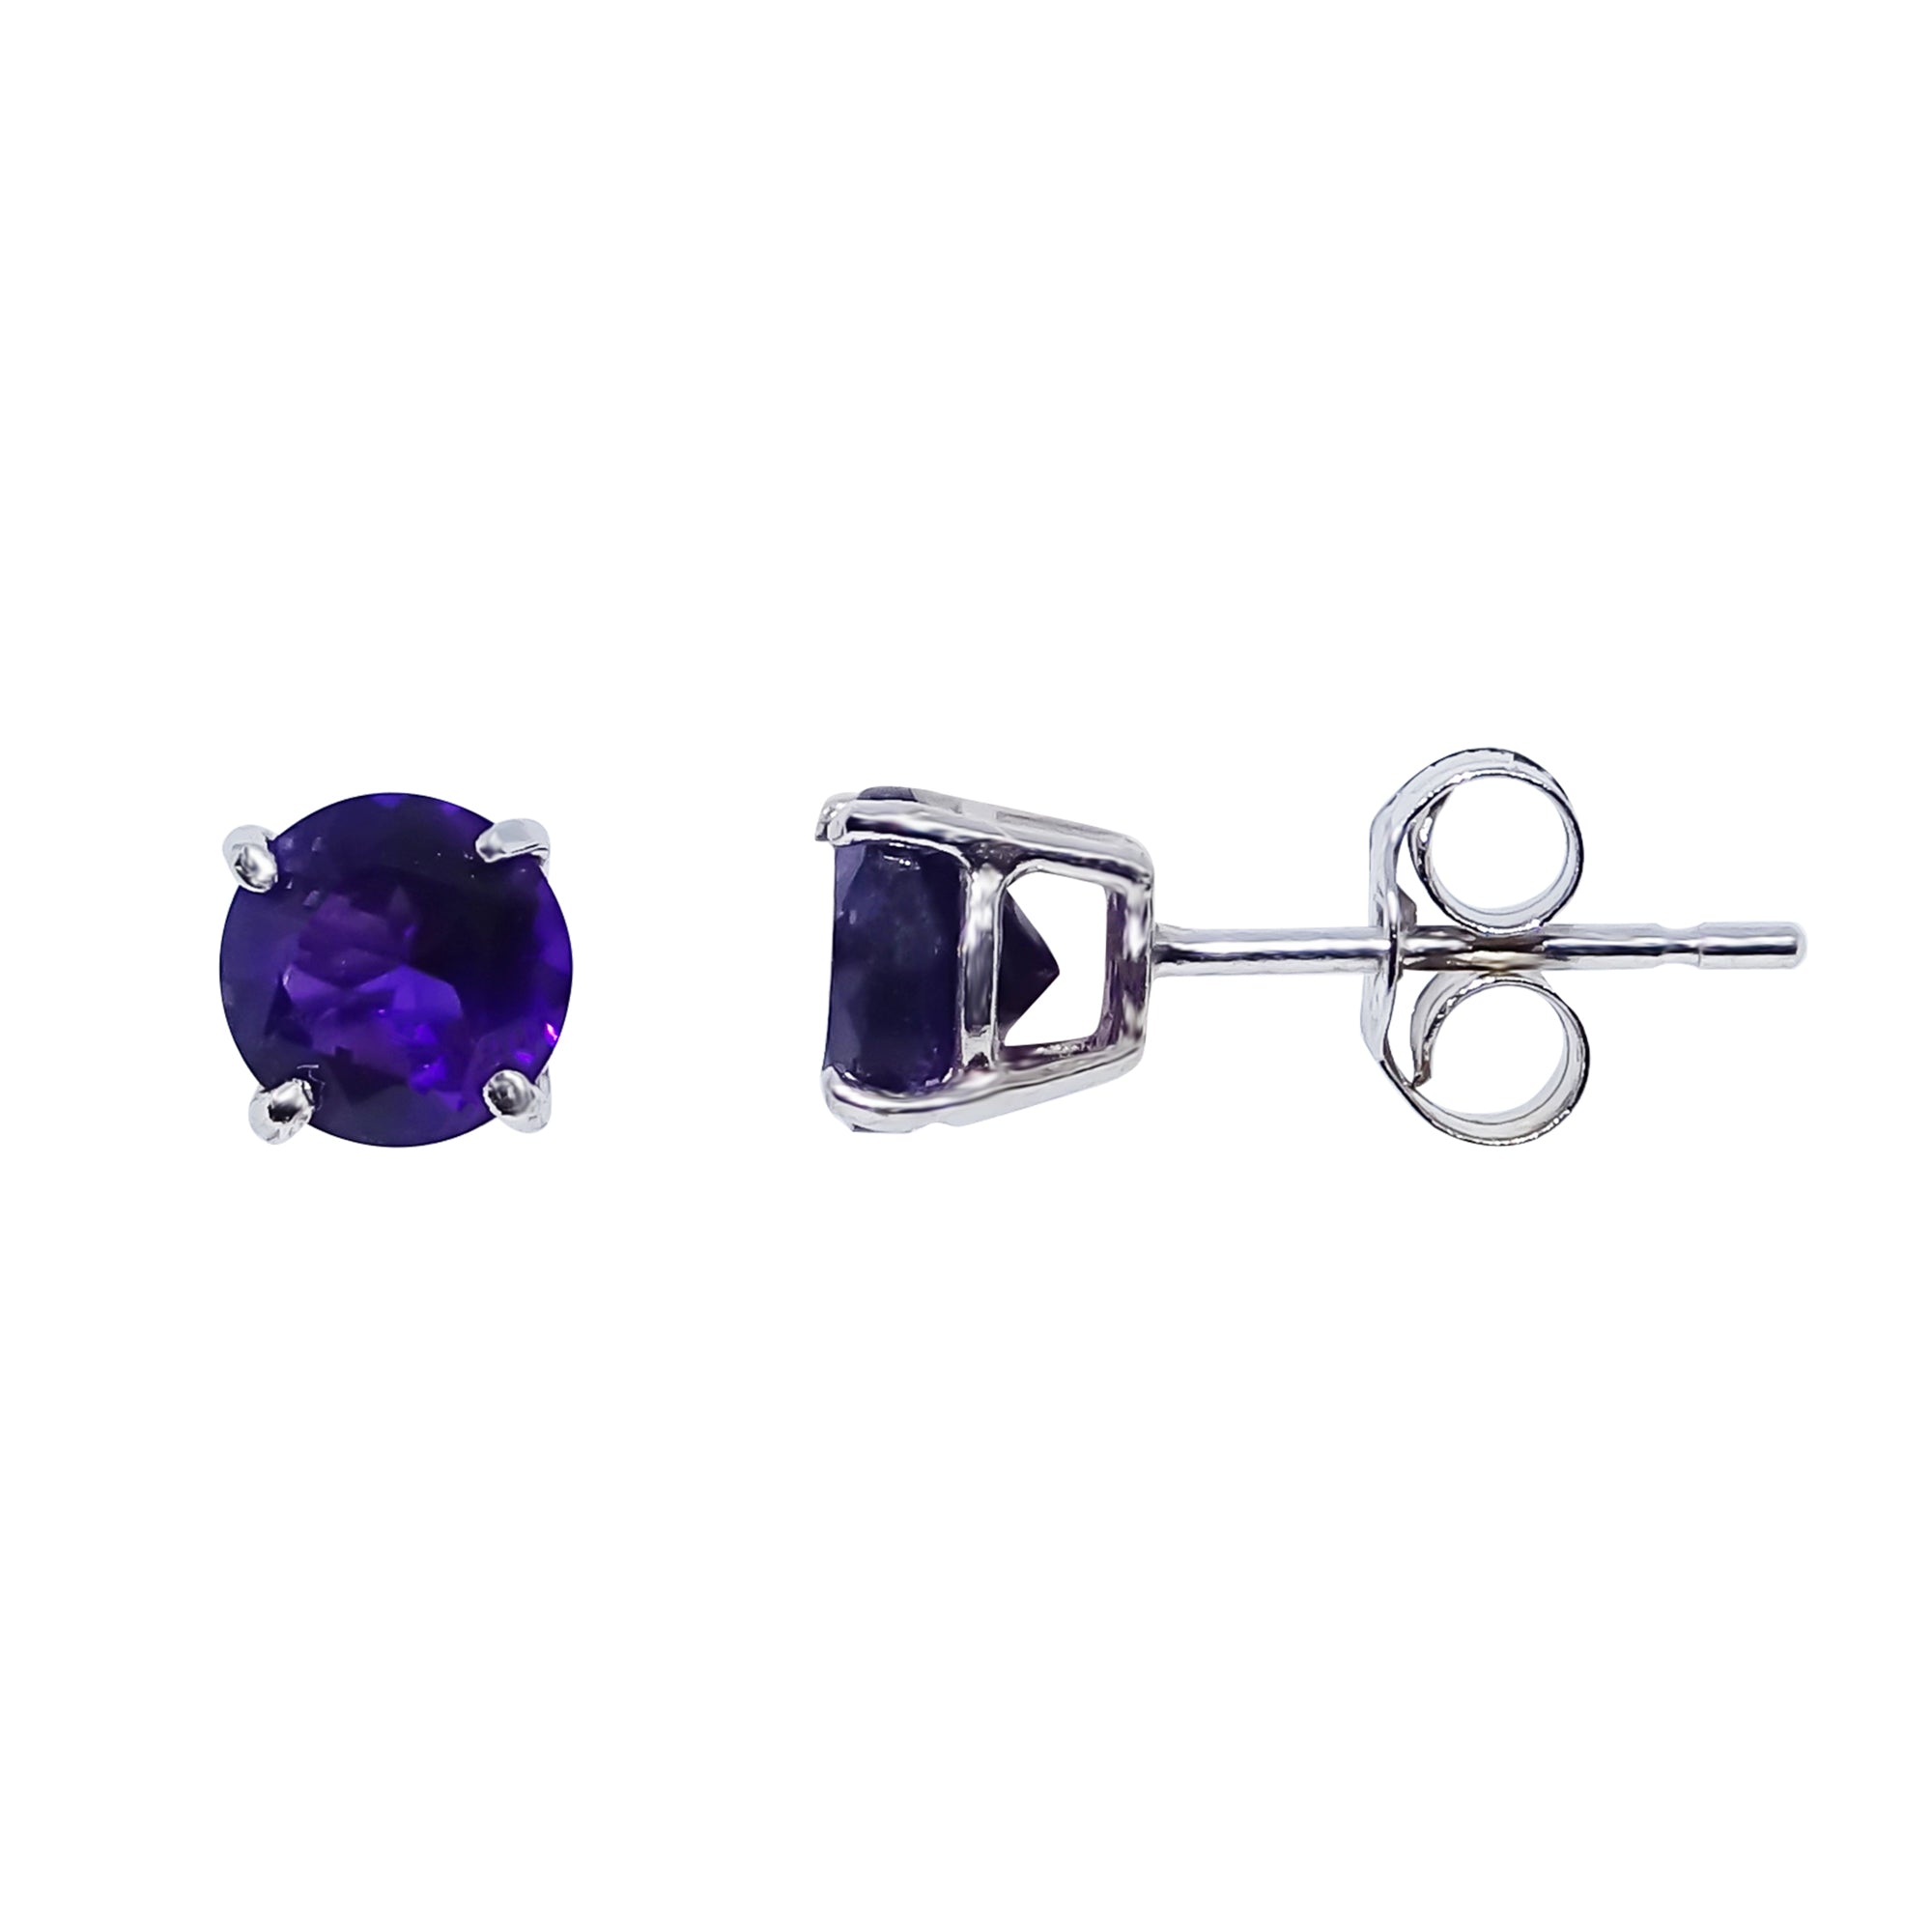 9ct white gold 5mm round amethyst stud earrings